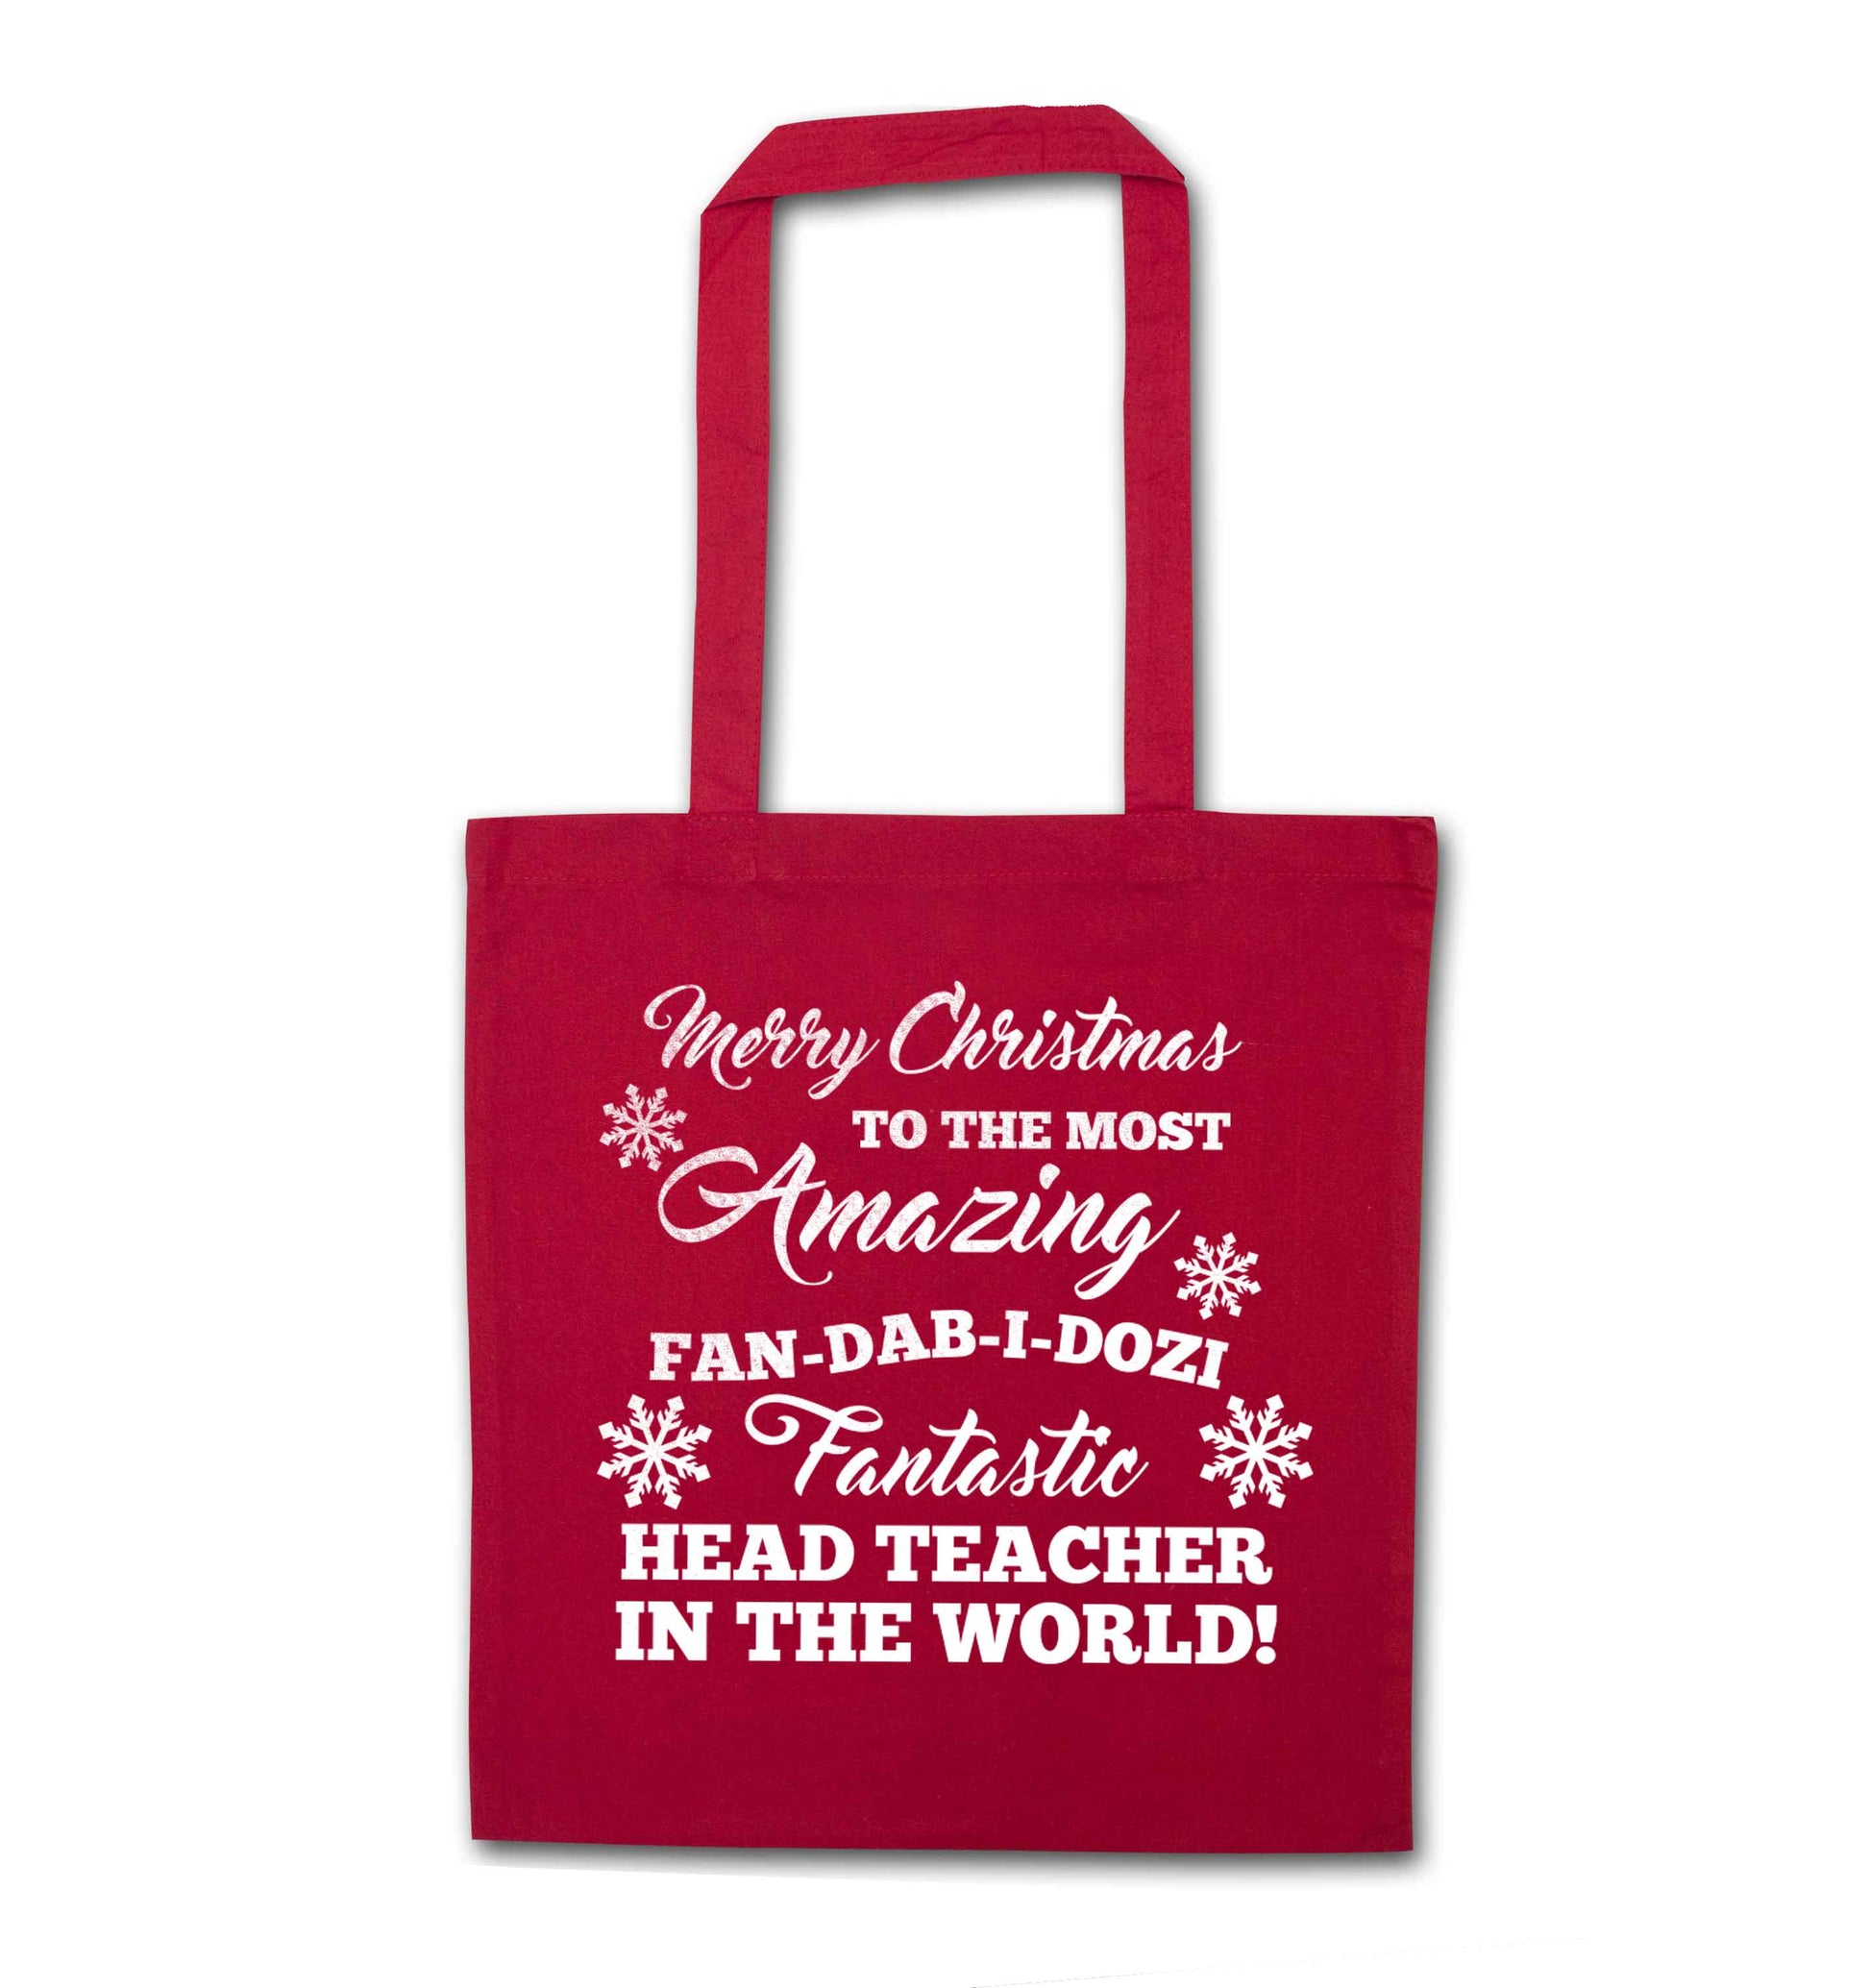 Merry Christmas to the most amazing fan-dab-i-dozi fantasic head teacher in the world red tote bag